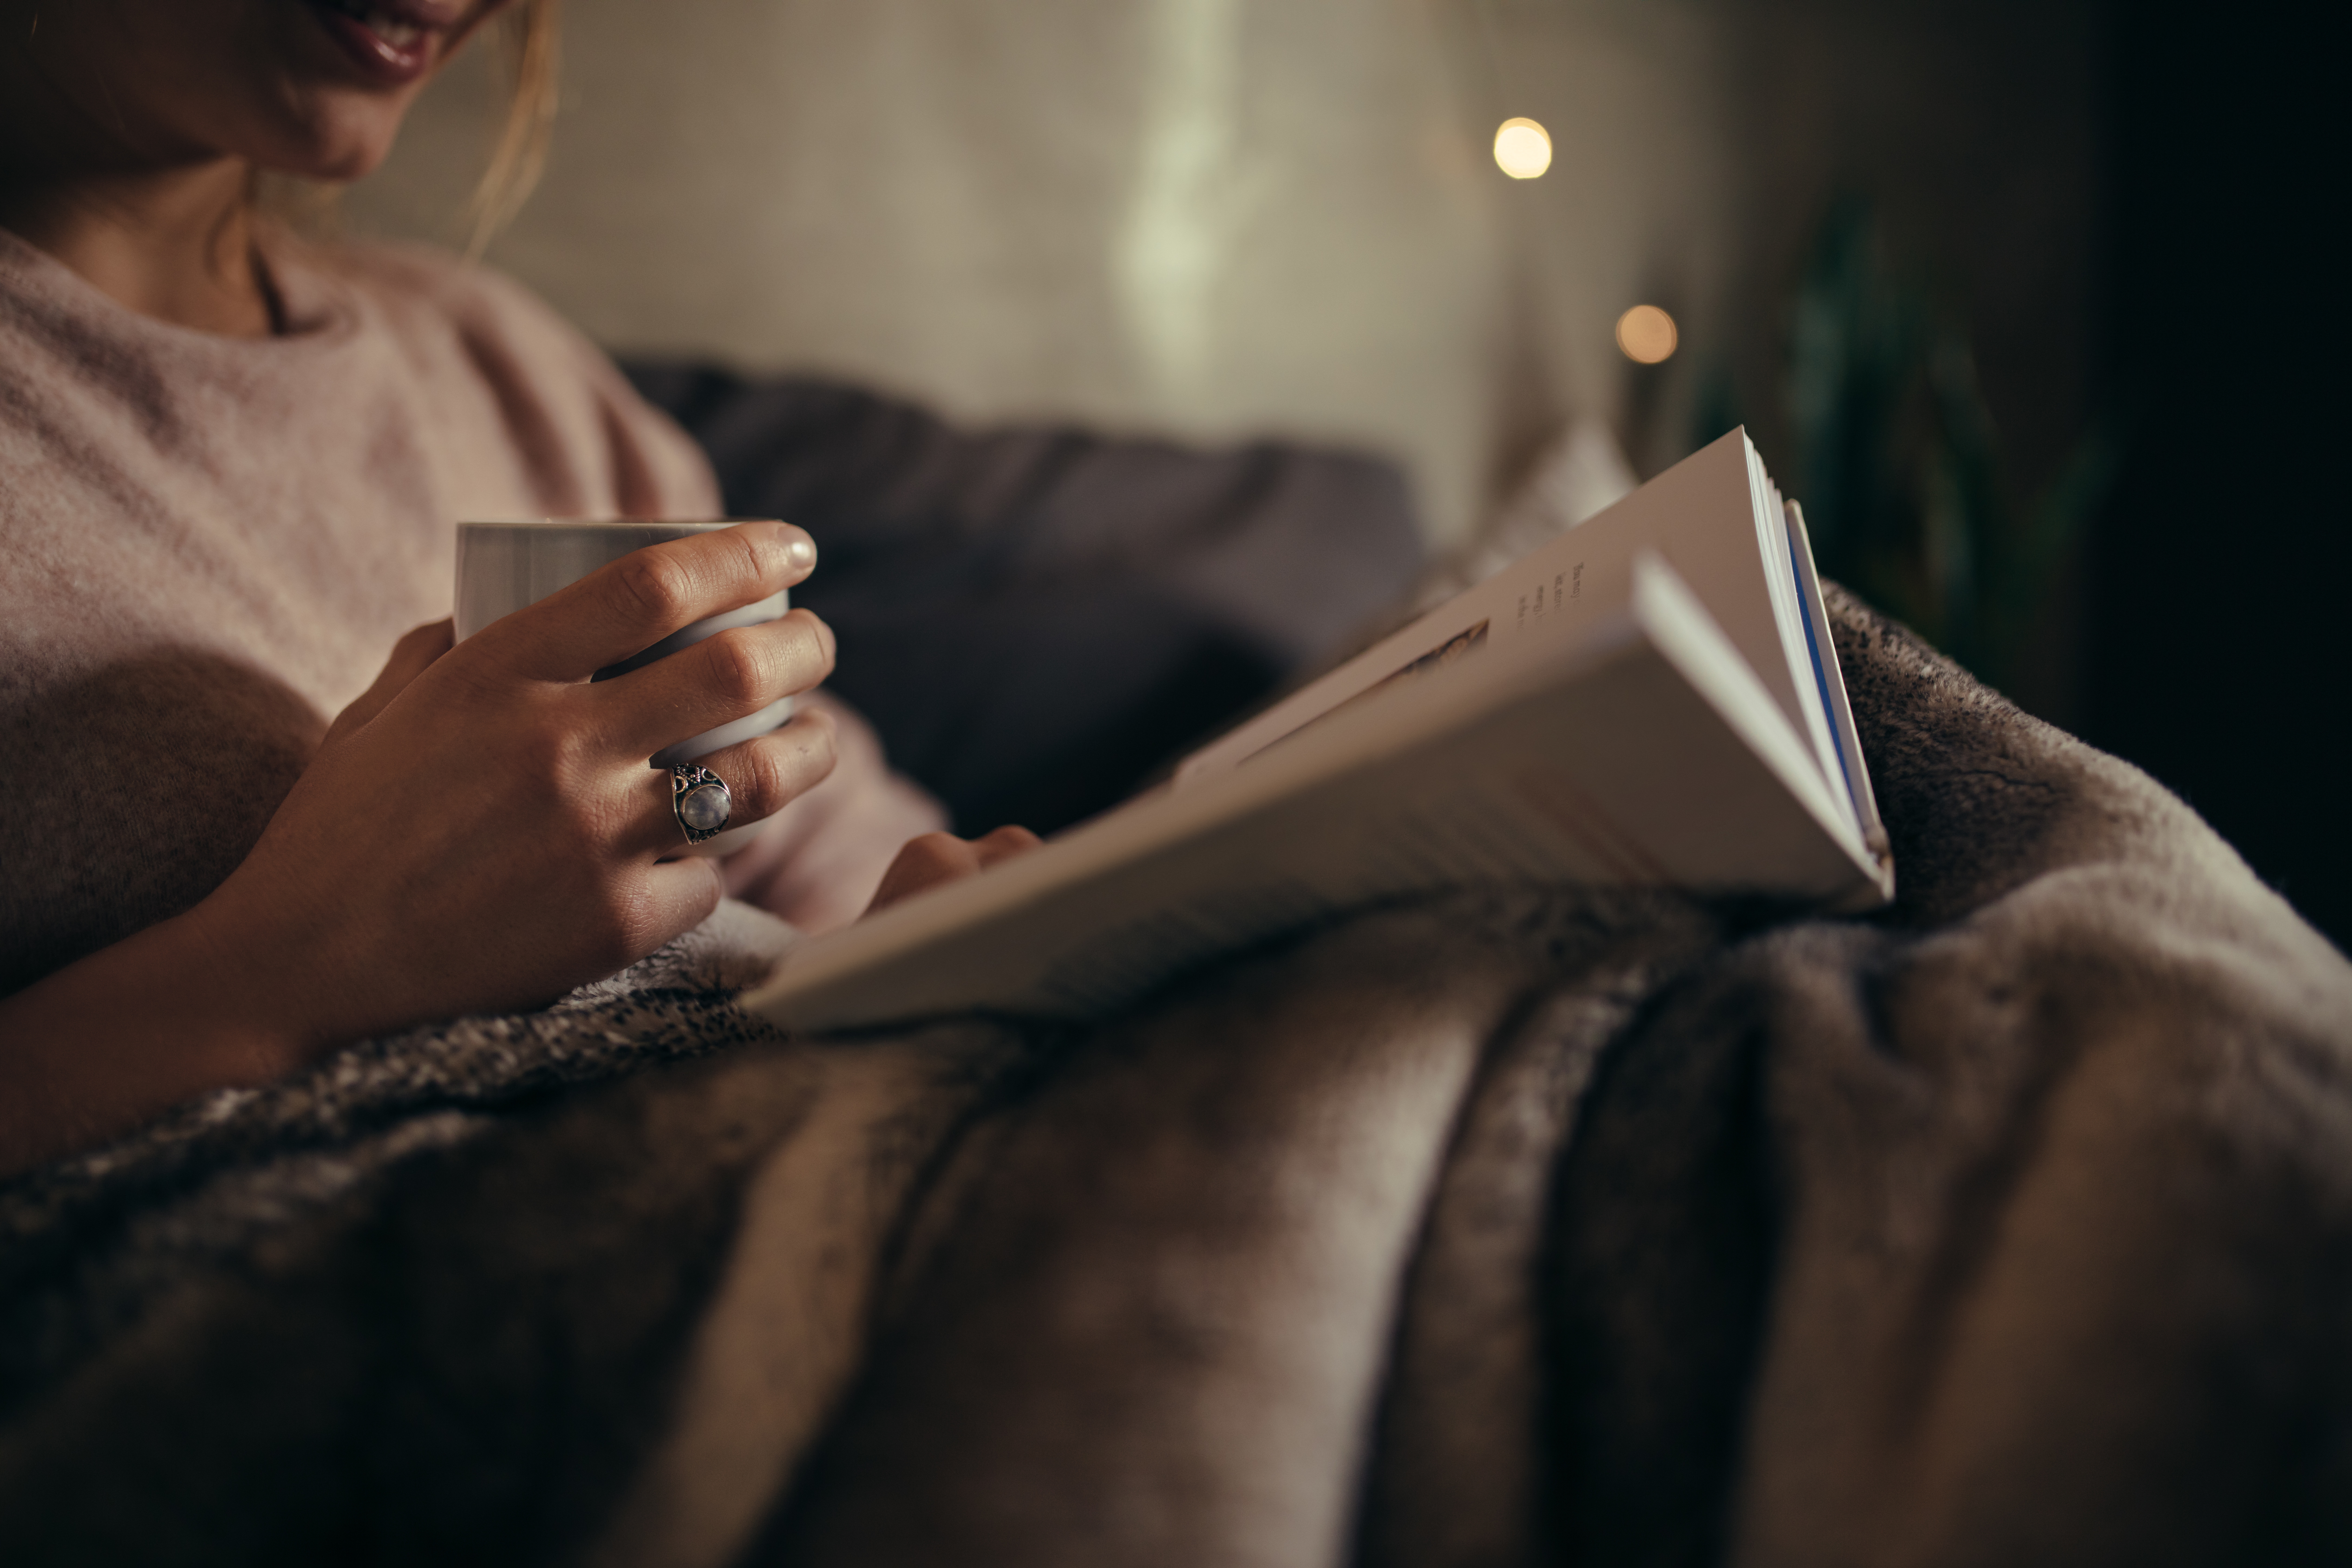 Woman reads a book in bed while wrapped in a blanket and enjoying a hot beverage